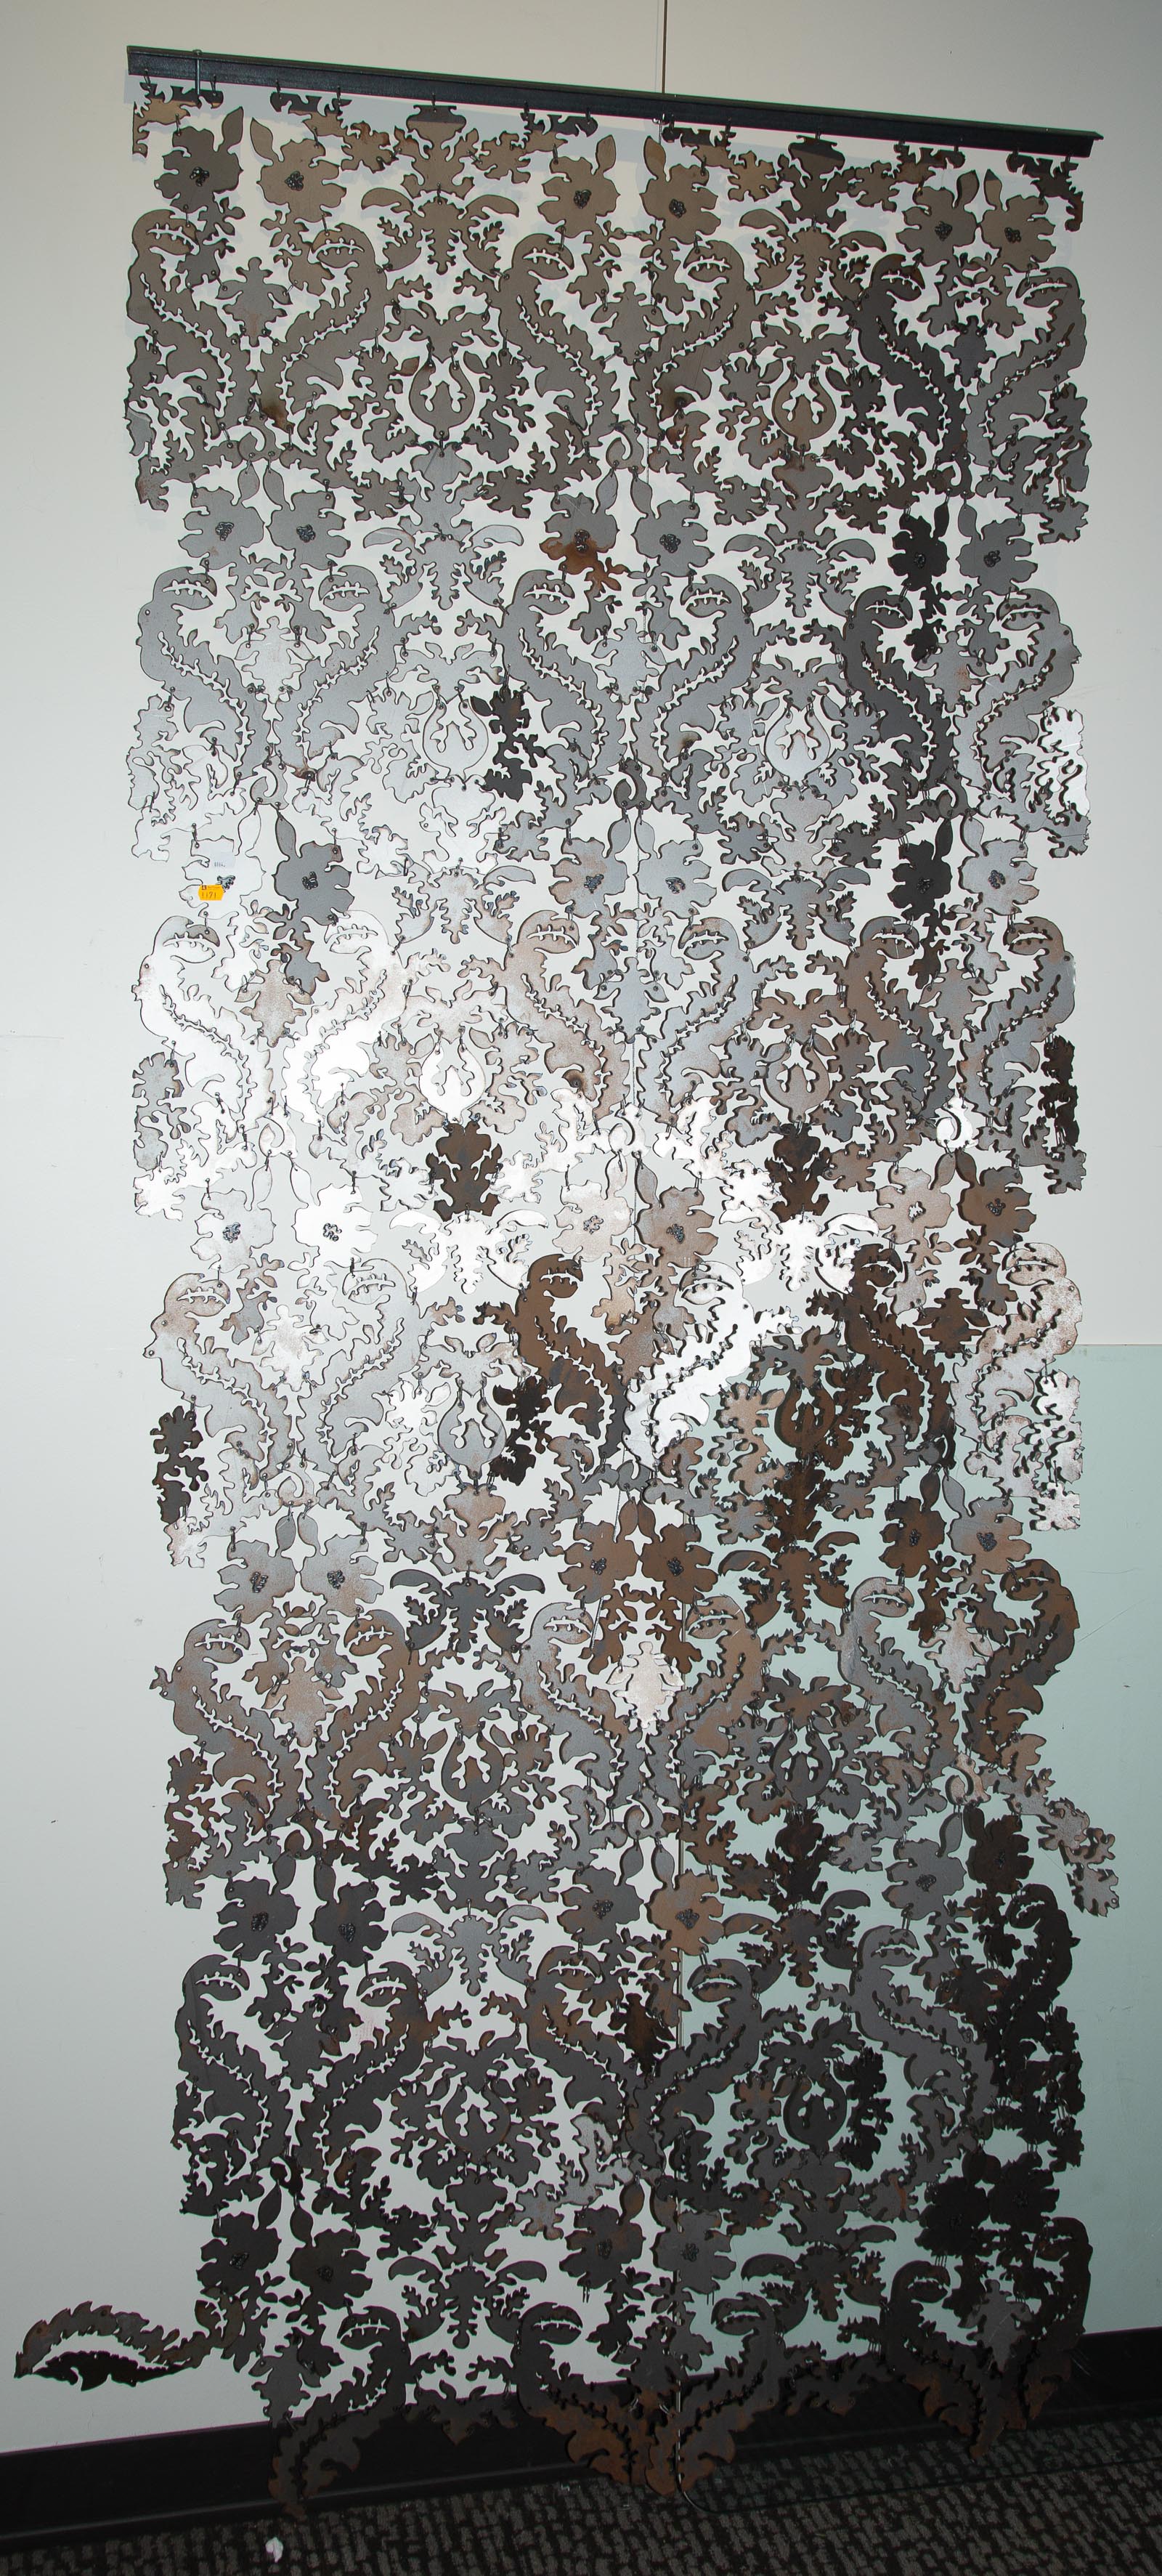 ABSTRACT FLORAL METAL WALL HANGING 335838